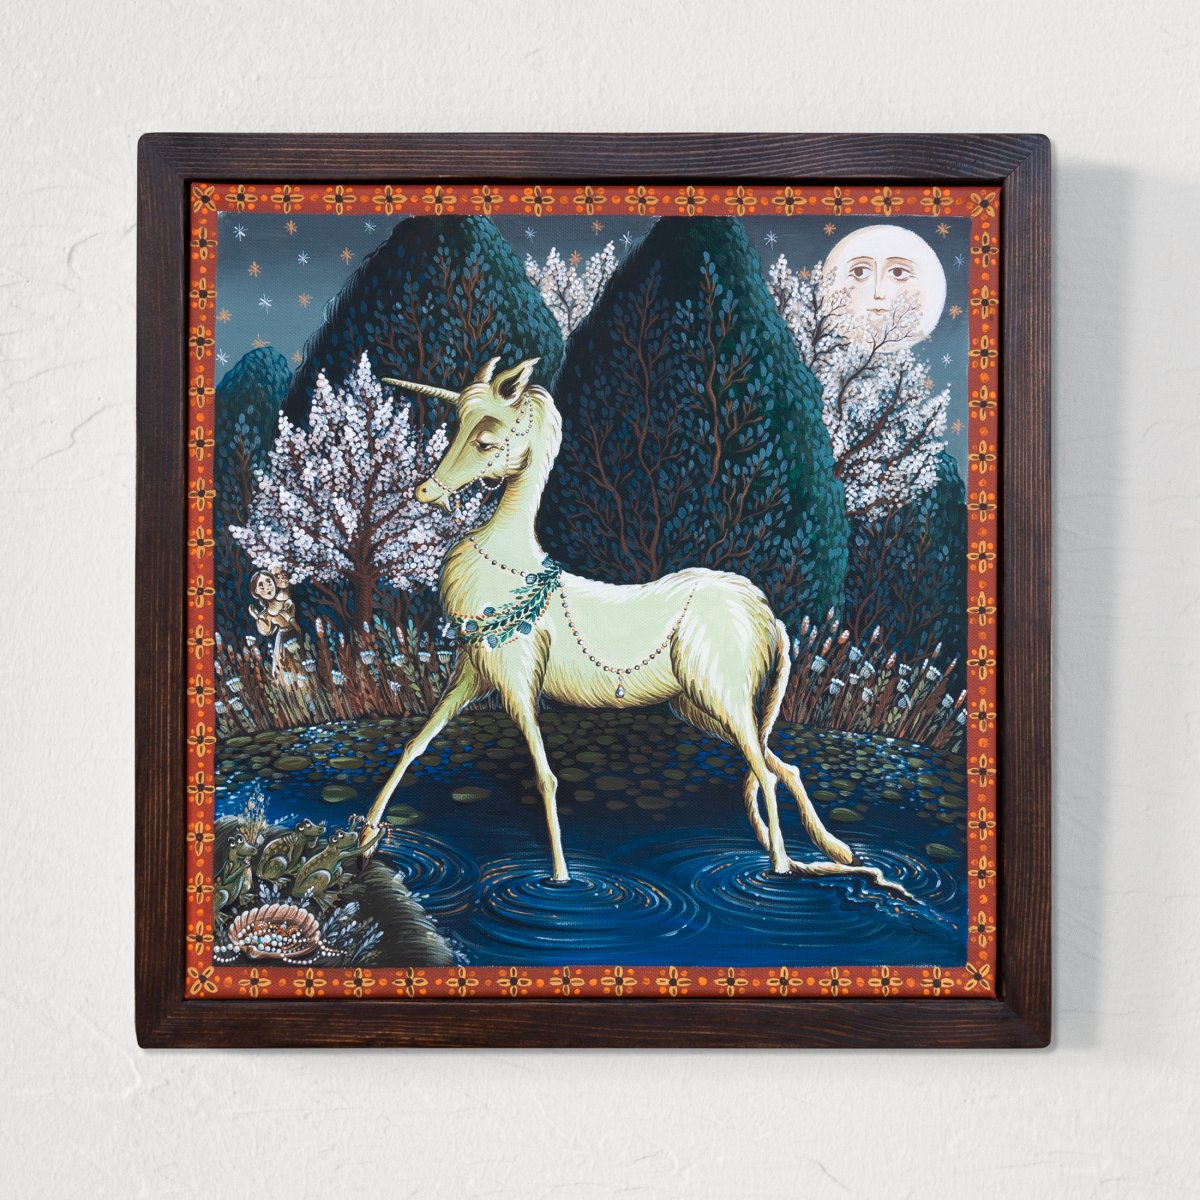 Canvas painting, "Behold the Unicorn", 40x40 cm, hand painted, wooden frame